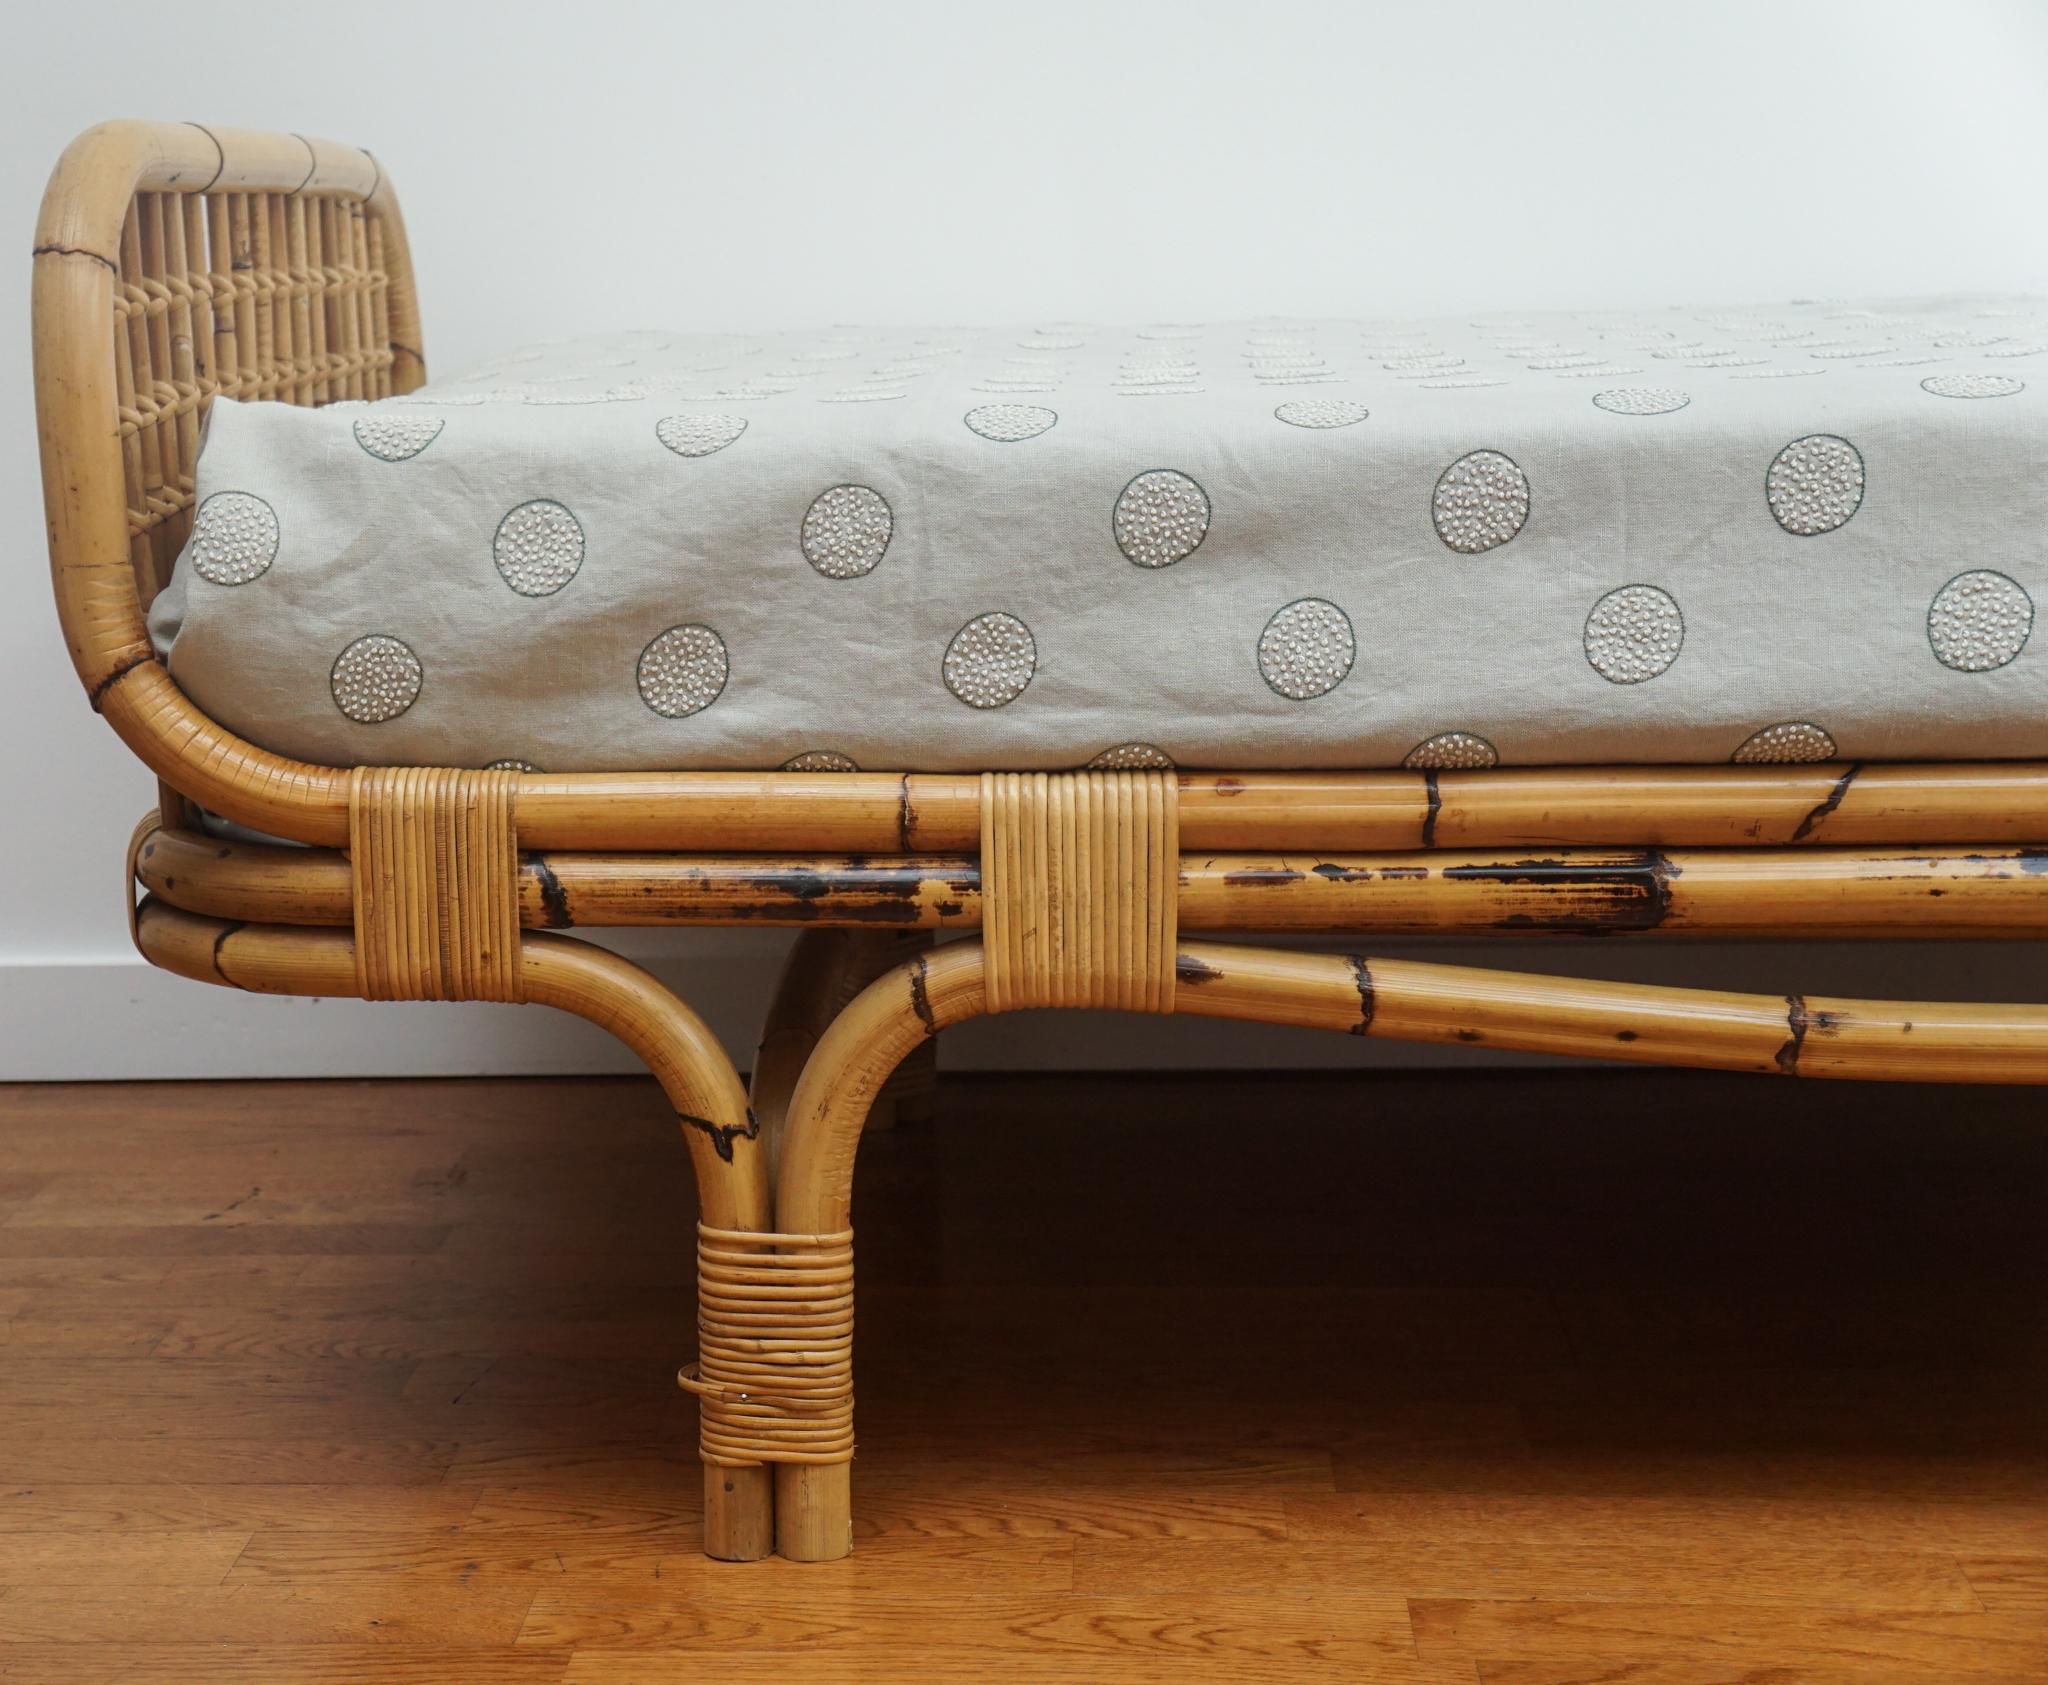 The French bamboo daybed, shown here, was made in the 1960s.  Solidly built and in very good vintage condition, the bamboo daybed is distinguished by its low profile design, graceful lines and warm, honey-colored patina.  The mattress, which is new